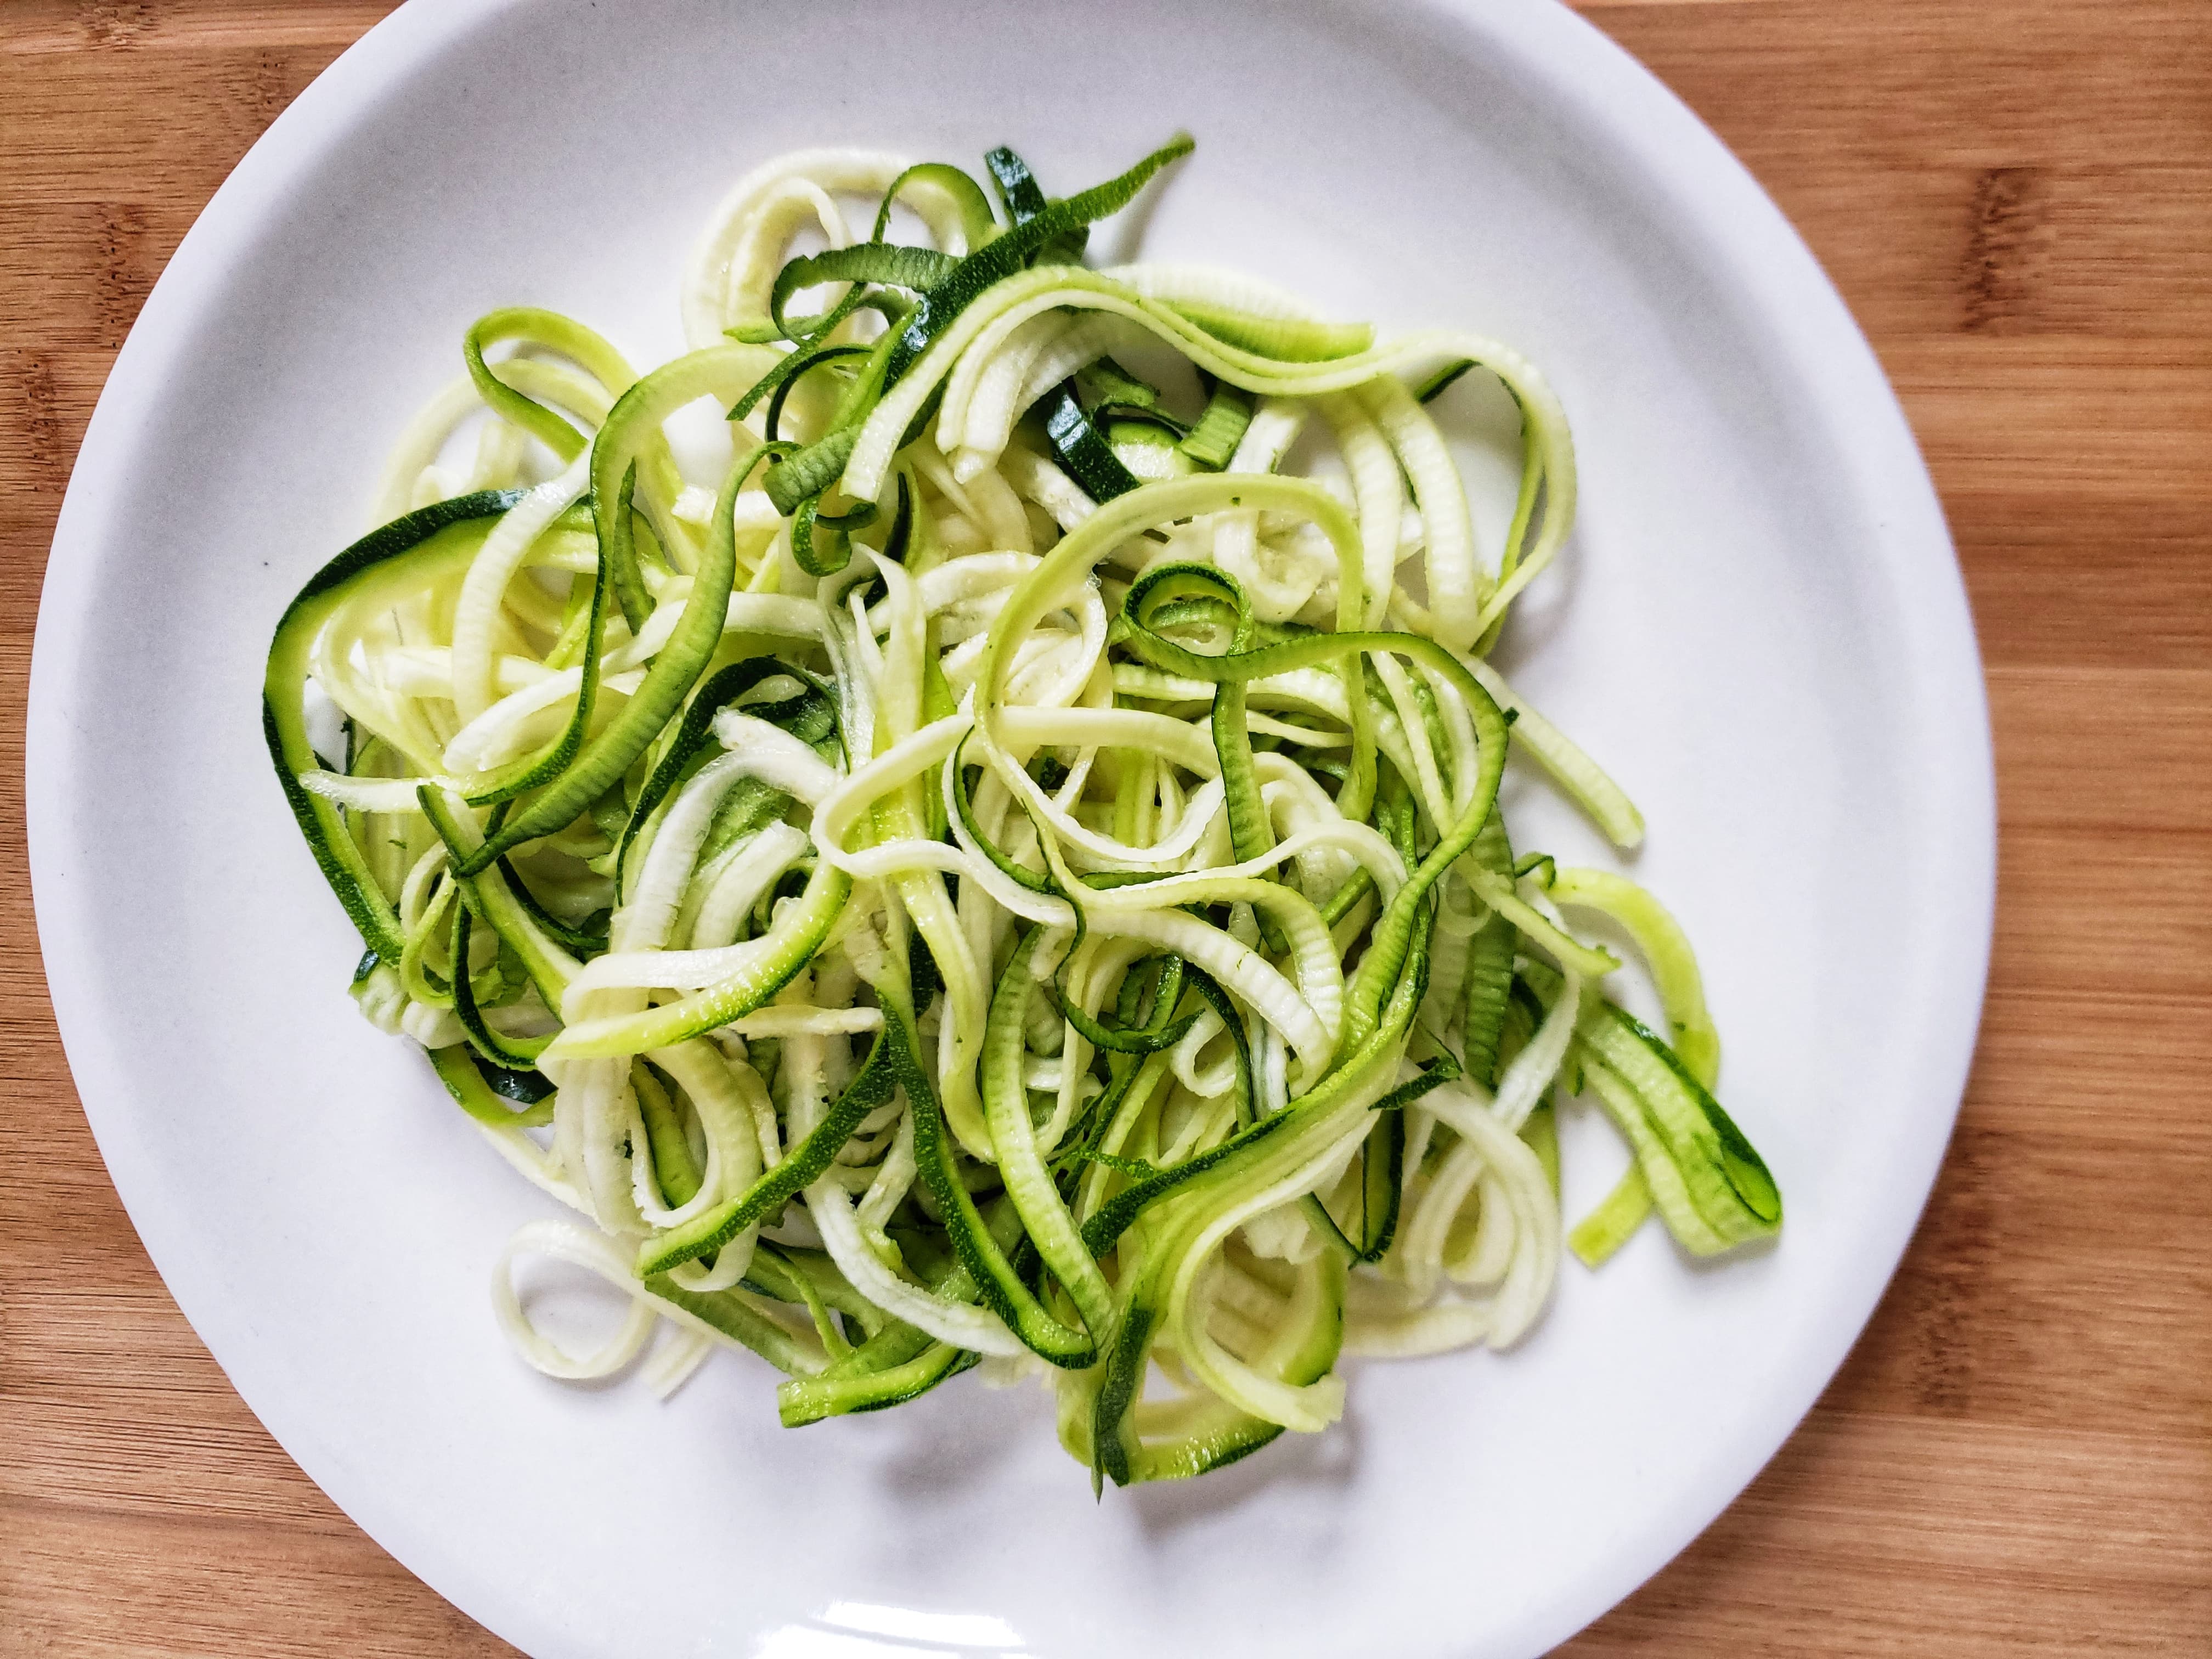 How to cook and prepare zucchini noodles. Quick and easy low carb zoodles! 3 easy ways to prepare zucchini noodles.